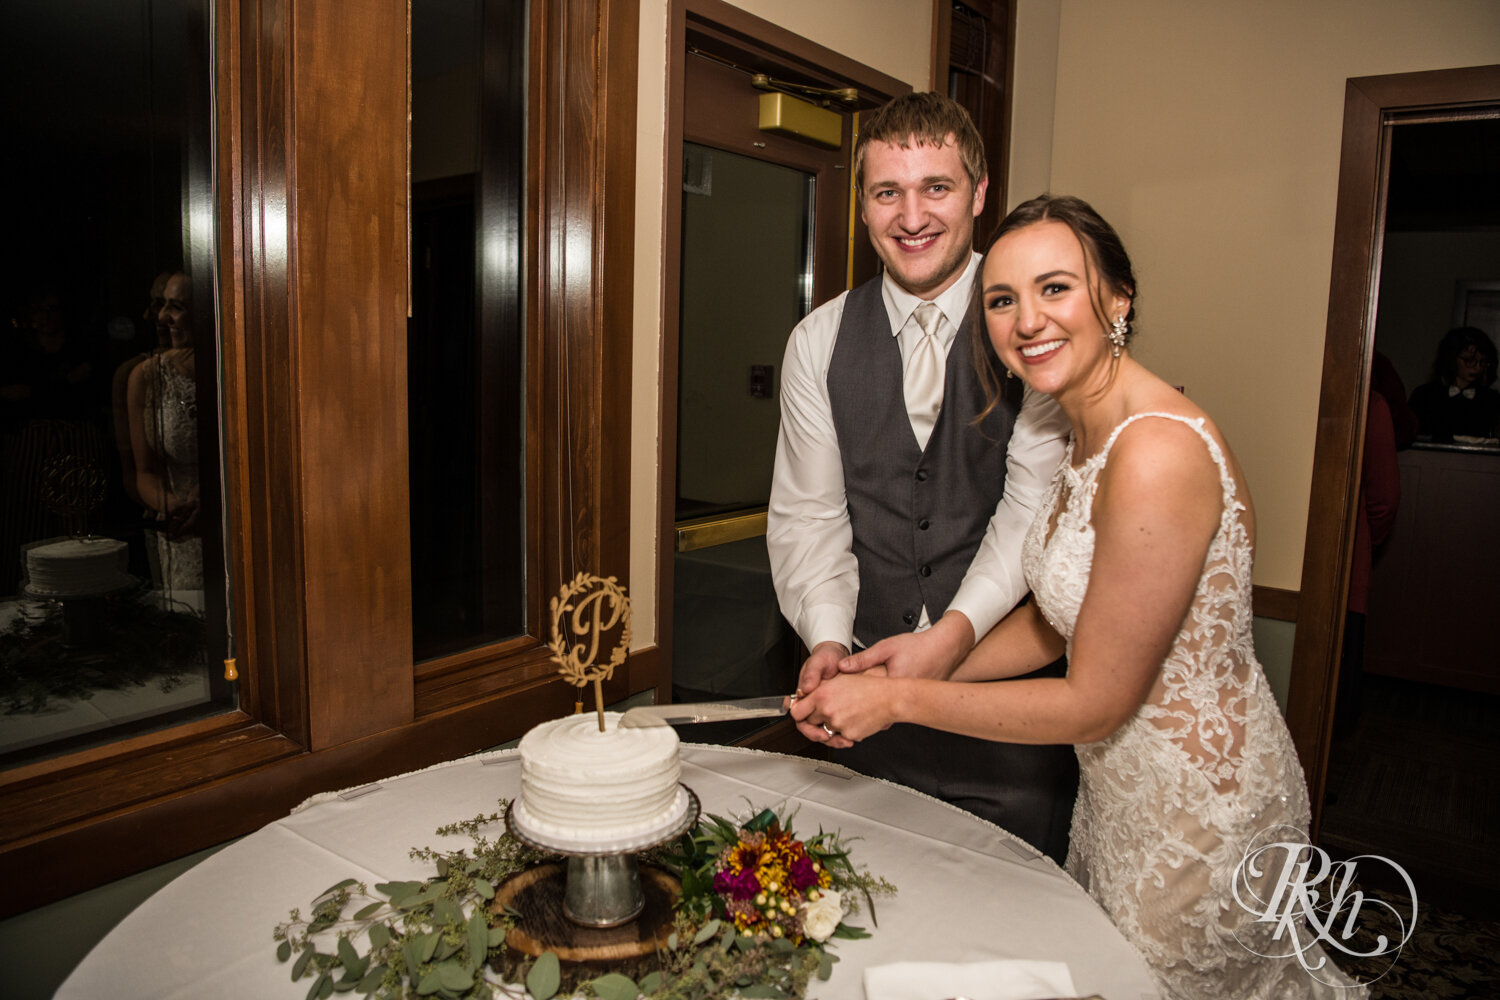 Bride and groom cut cake at wedding reception on rainy day at The Wilds Golf Club in Prior Lake, Minnesota.